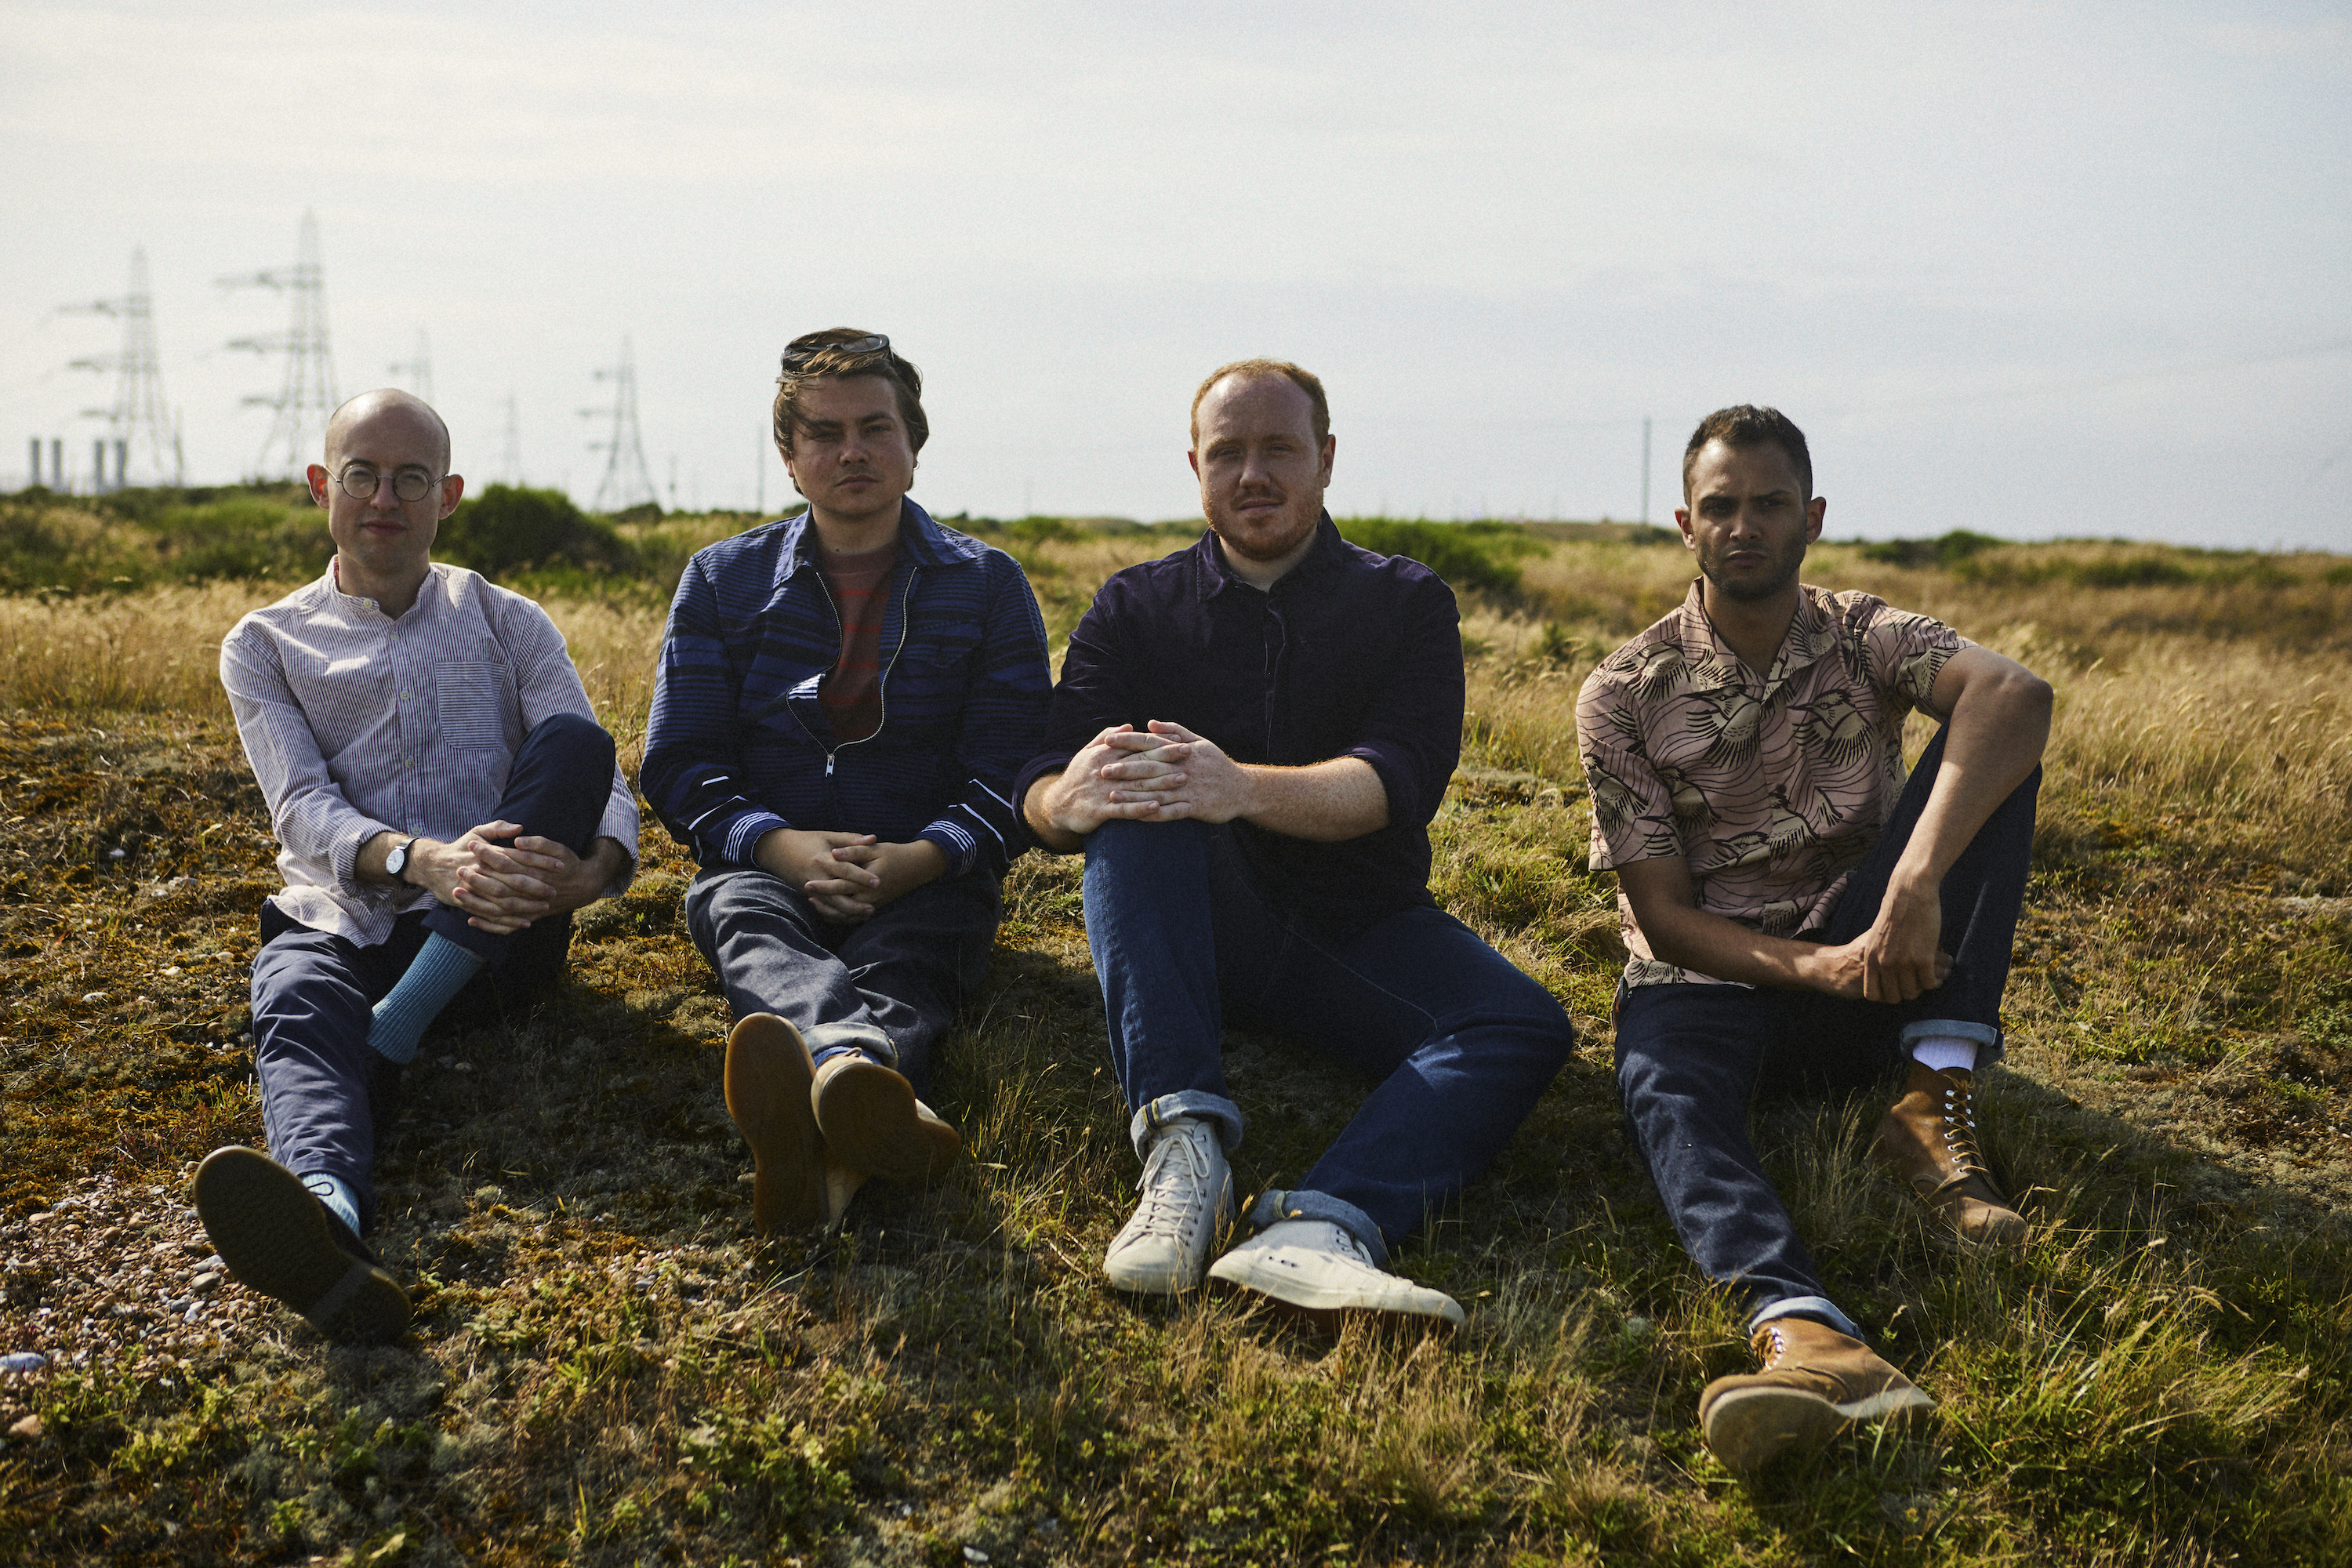 Bombay Bicycle Club announce 2020 UK tour